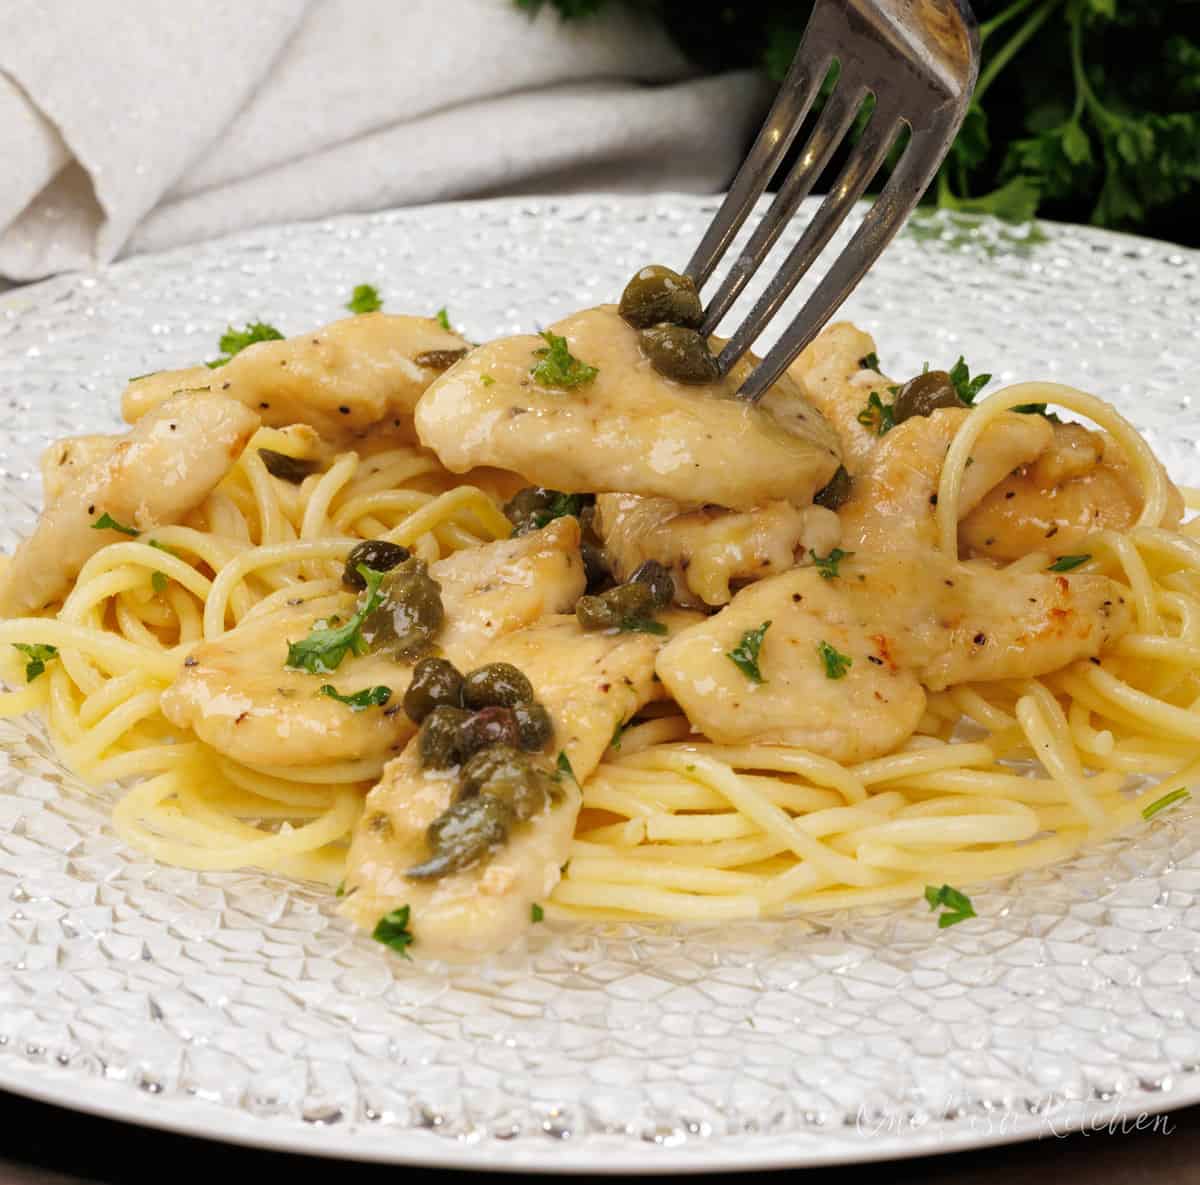 a forkful of chicken with pasta and piccata sauce over a plate